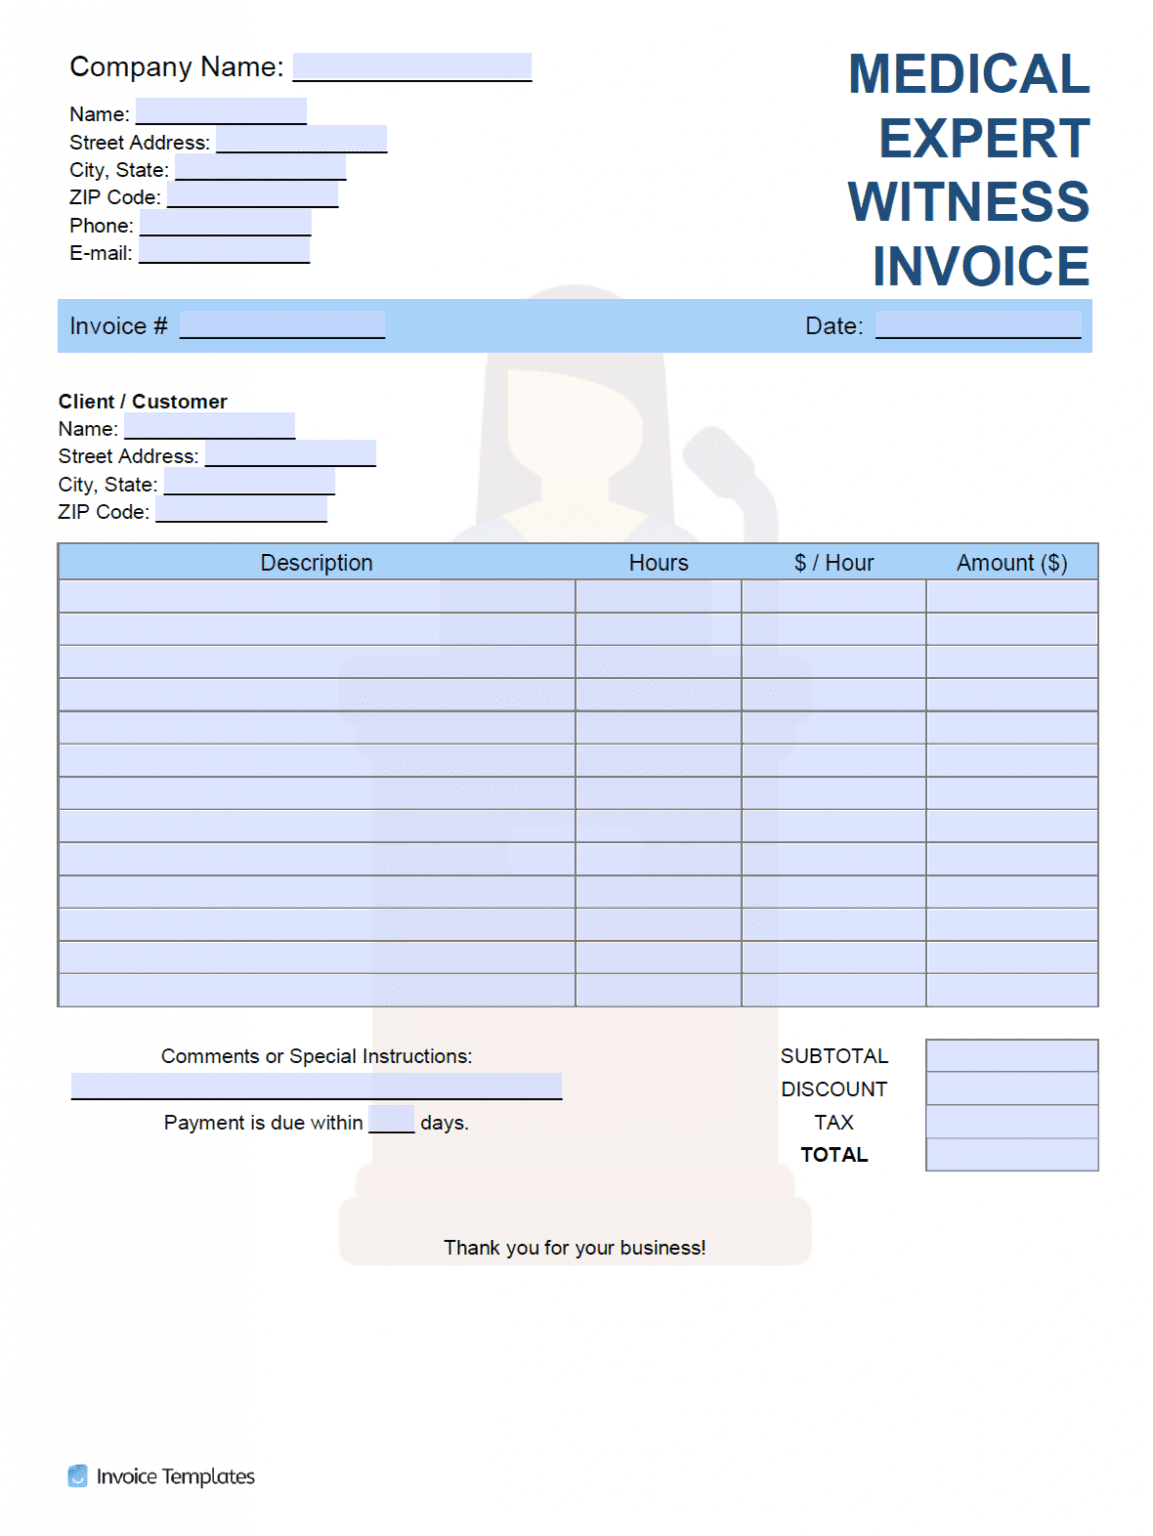 Medical Invoice Template PDF WORD EXCEL